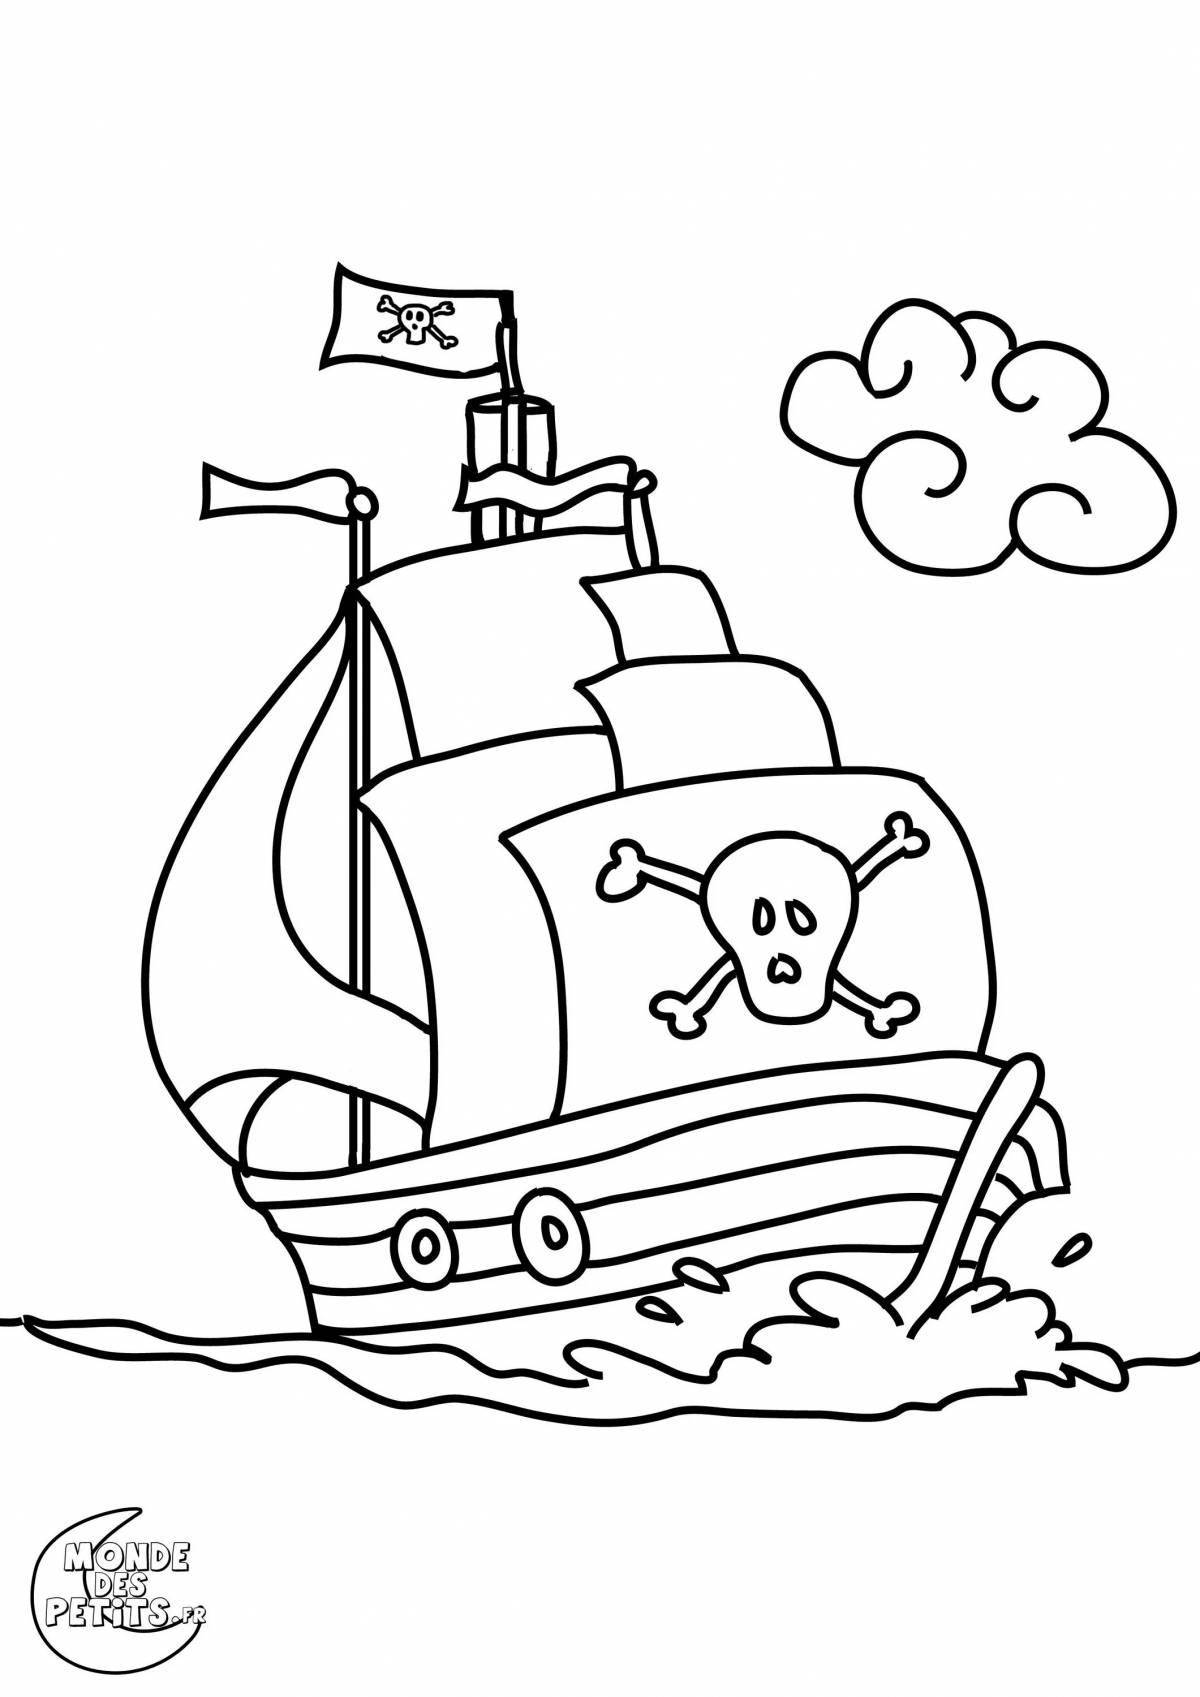 Dazzling pirate ship coloring book for kids